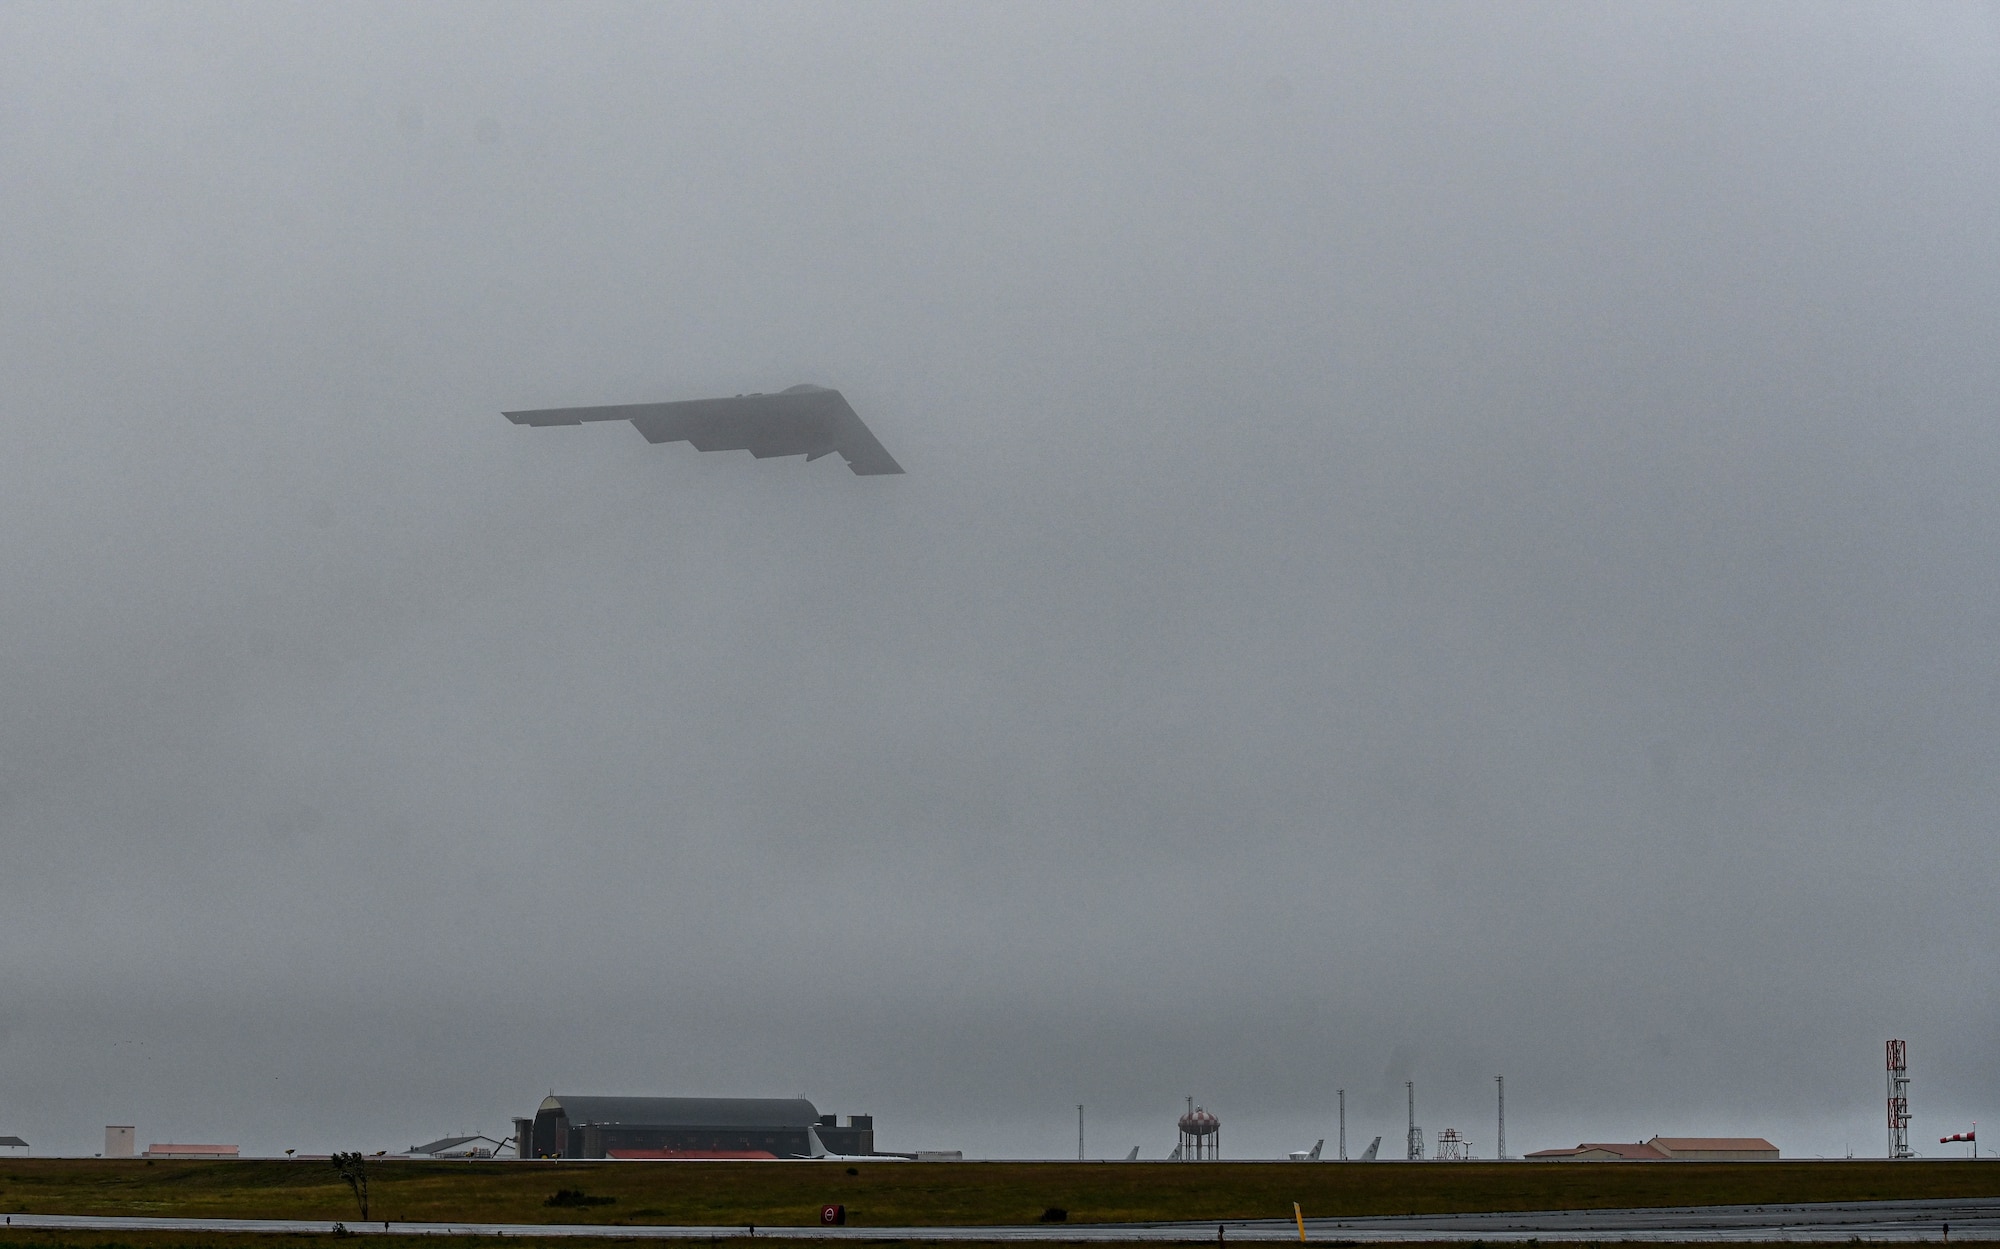 Two B-2 Spirit stealth bombers, assigned to Whiteman Air Force Base, Missouri, depart from Keflavik Air Base, Iceland, August 25, 2021. The stealth bombers integrate with U.S. Air Forces in Europe F-15 Eagles as part of a joint training operation in the European theater. Training with allies and partners, and other U.S. Air Force units build strategic relationships that are critical for timely and coordinated responses when needed. (U.S. Air Force photo by Airman 1st Class Victoria Hommel)